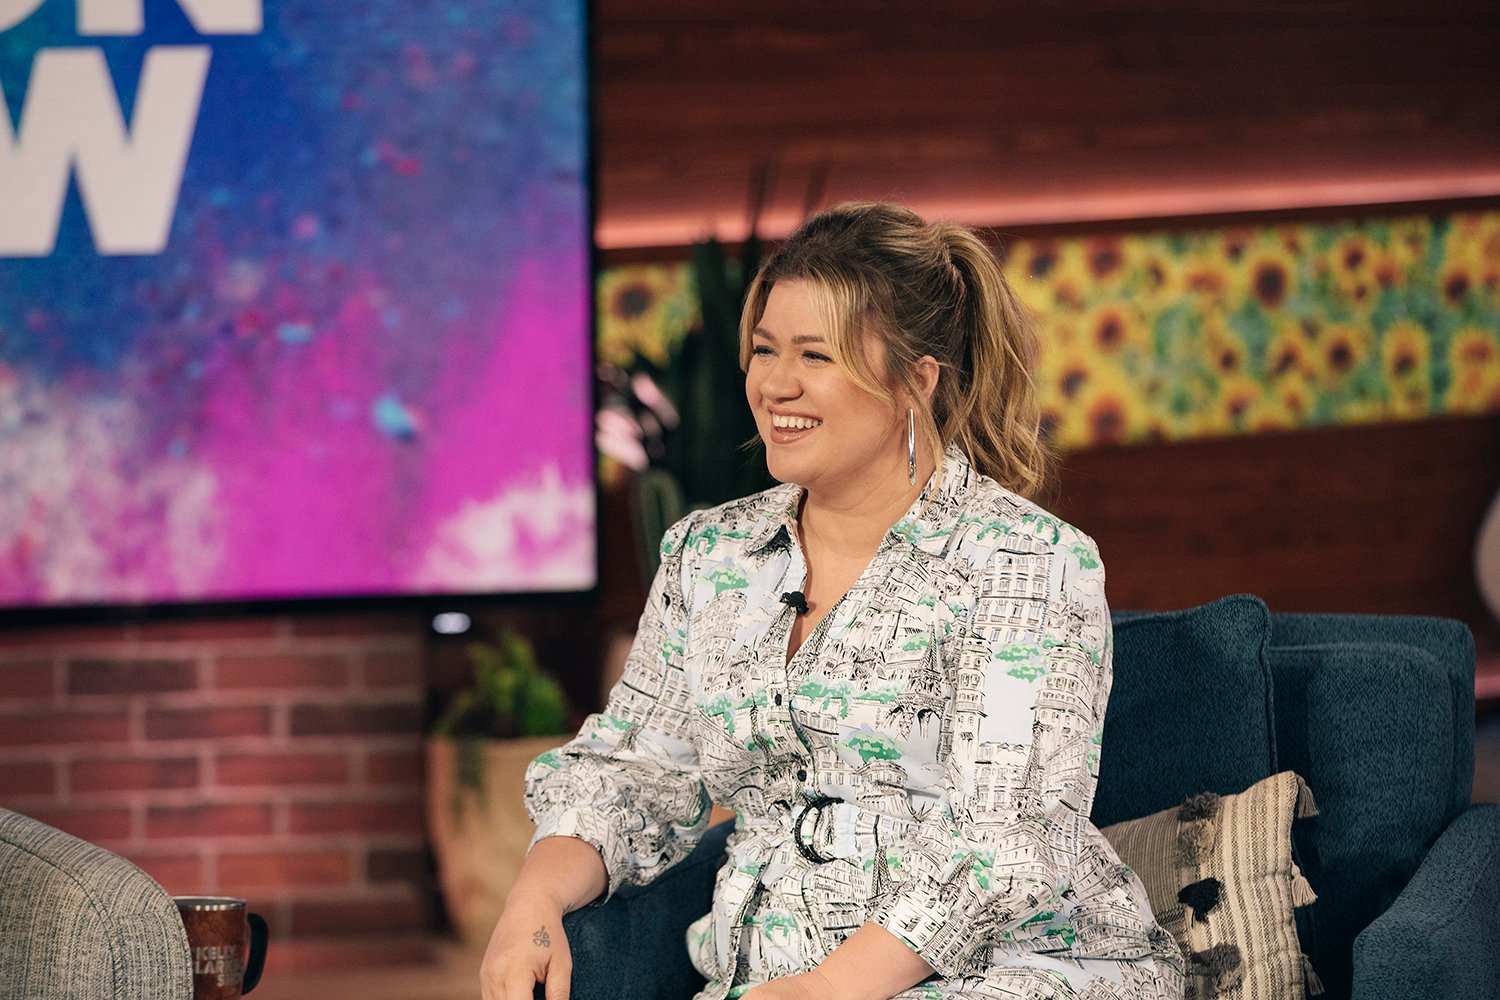 Former The Voice coach Kelly Clarkson on The Kelly Clarkson Show ahead of her summer off